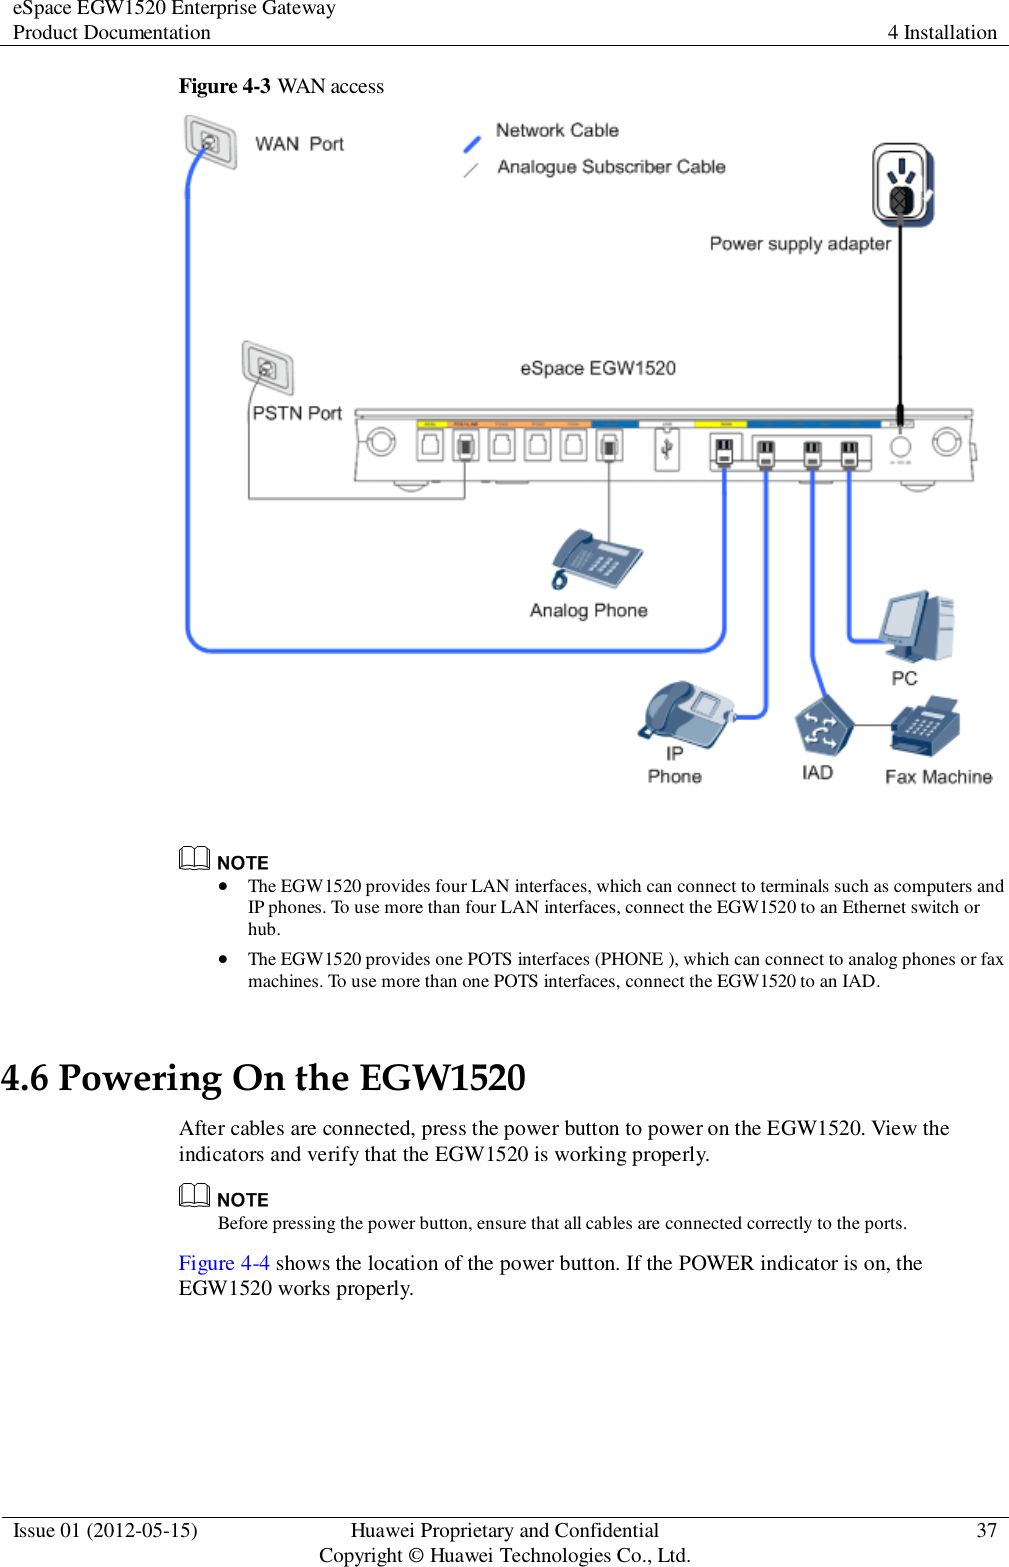 eSpace EGW1520 Enterprise Gateway Product Documentation 4 Installation  Issue 01 (2012-05-15) Huawei Proprietary and Confidential                                     Copyright © Huawei Technologies Co., Ltd. 37  Figure 4-3 WAN access     The EGW1520 provides four LAN interfaces, which can connect to terminals such as computers and IP phones. To use more than four LAN interfaces, connect the EGW1520 to an Ethernet switch or hub.  The EGW1520 provides one POTS interfaces (PHONE ), which can connect to analog phones or fax machines. To use more than one POTS interfaces, connect the EGW1520 to an IAD. 4.6 Powering On the EGW1520 After cables are connected, press the power button to power on the EGW1520. View the indicators and verify that the EGW1520 is working properly.    Before pressing the power button, ensure that all cables are connected correctly to the ports. Figure 4-4 shows the location of the power button. If the POWER indicator is on, the EGW1520 works properly. 